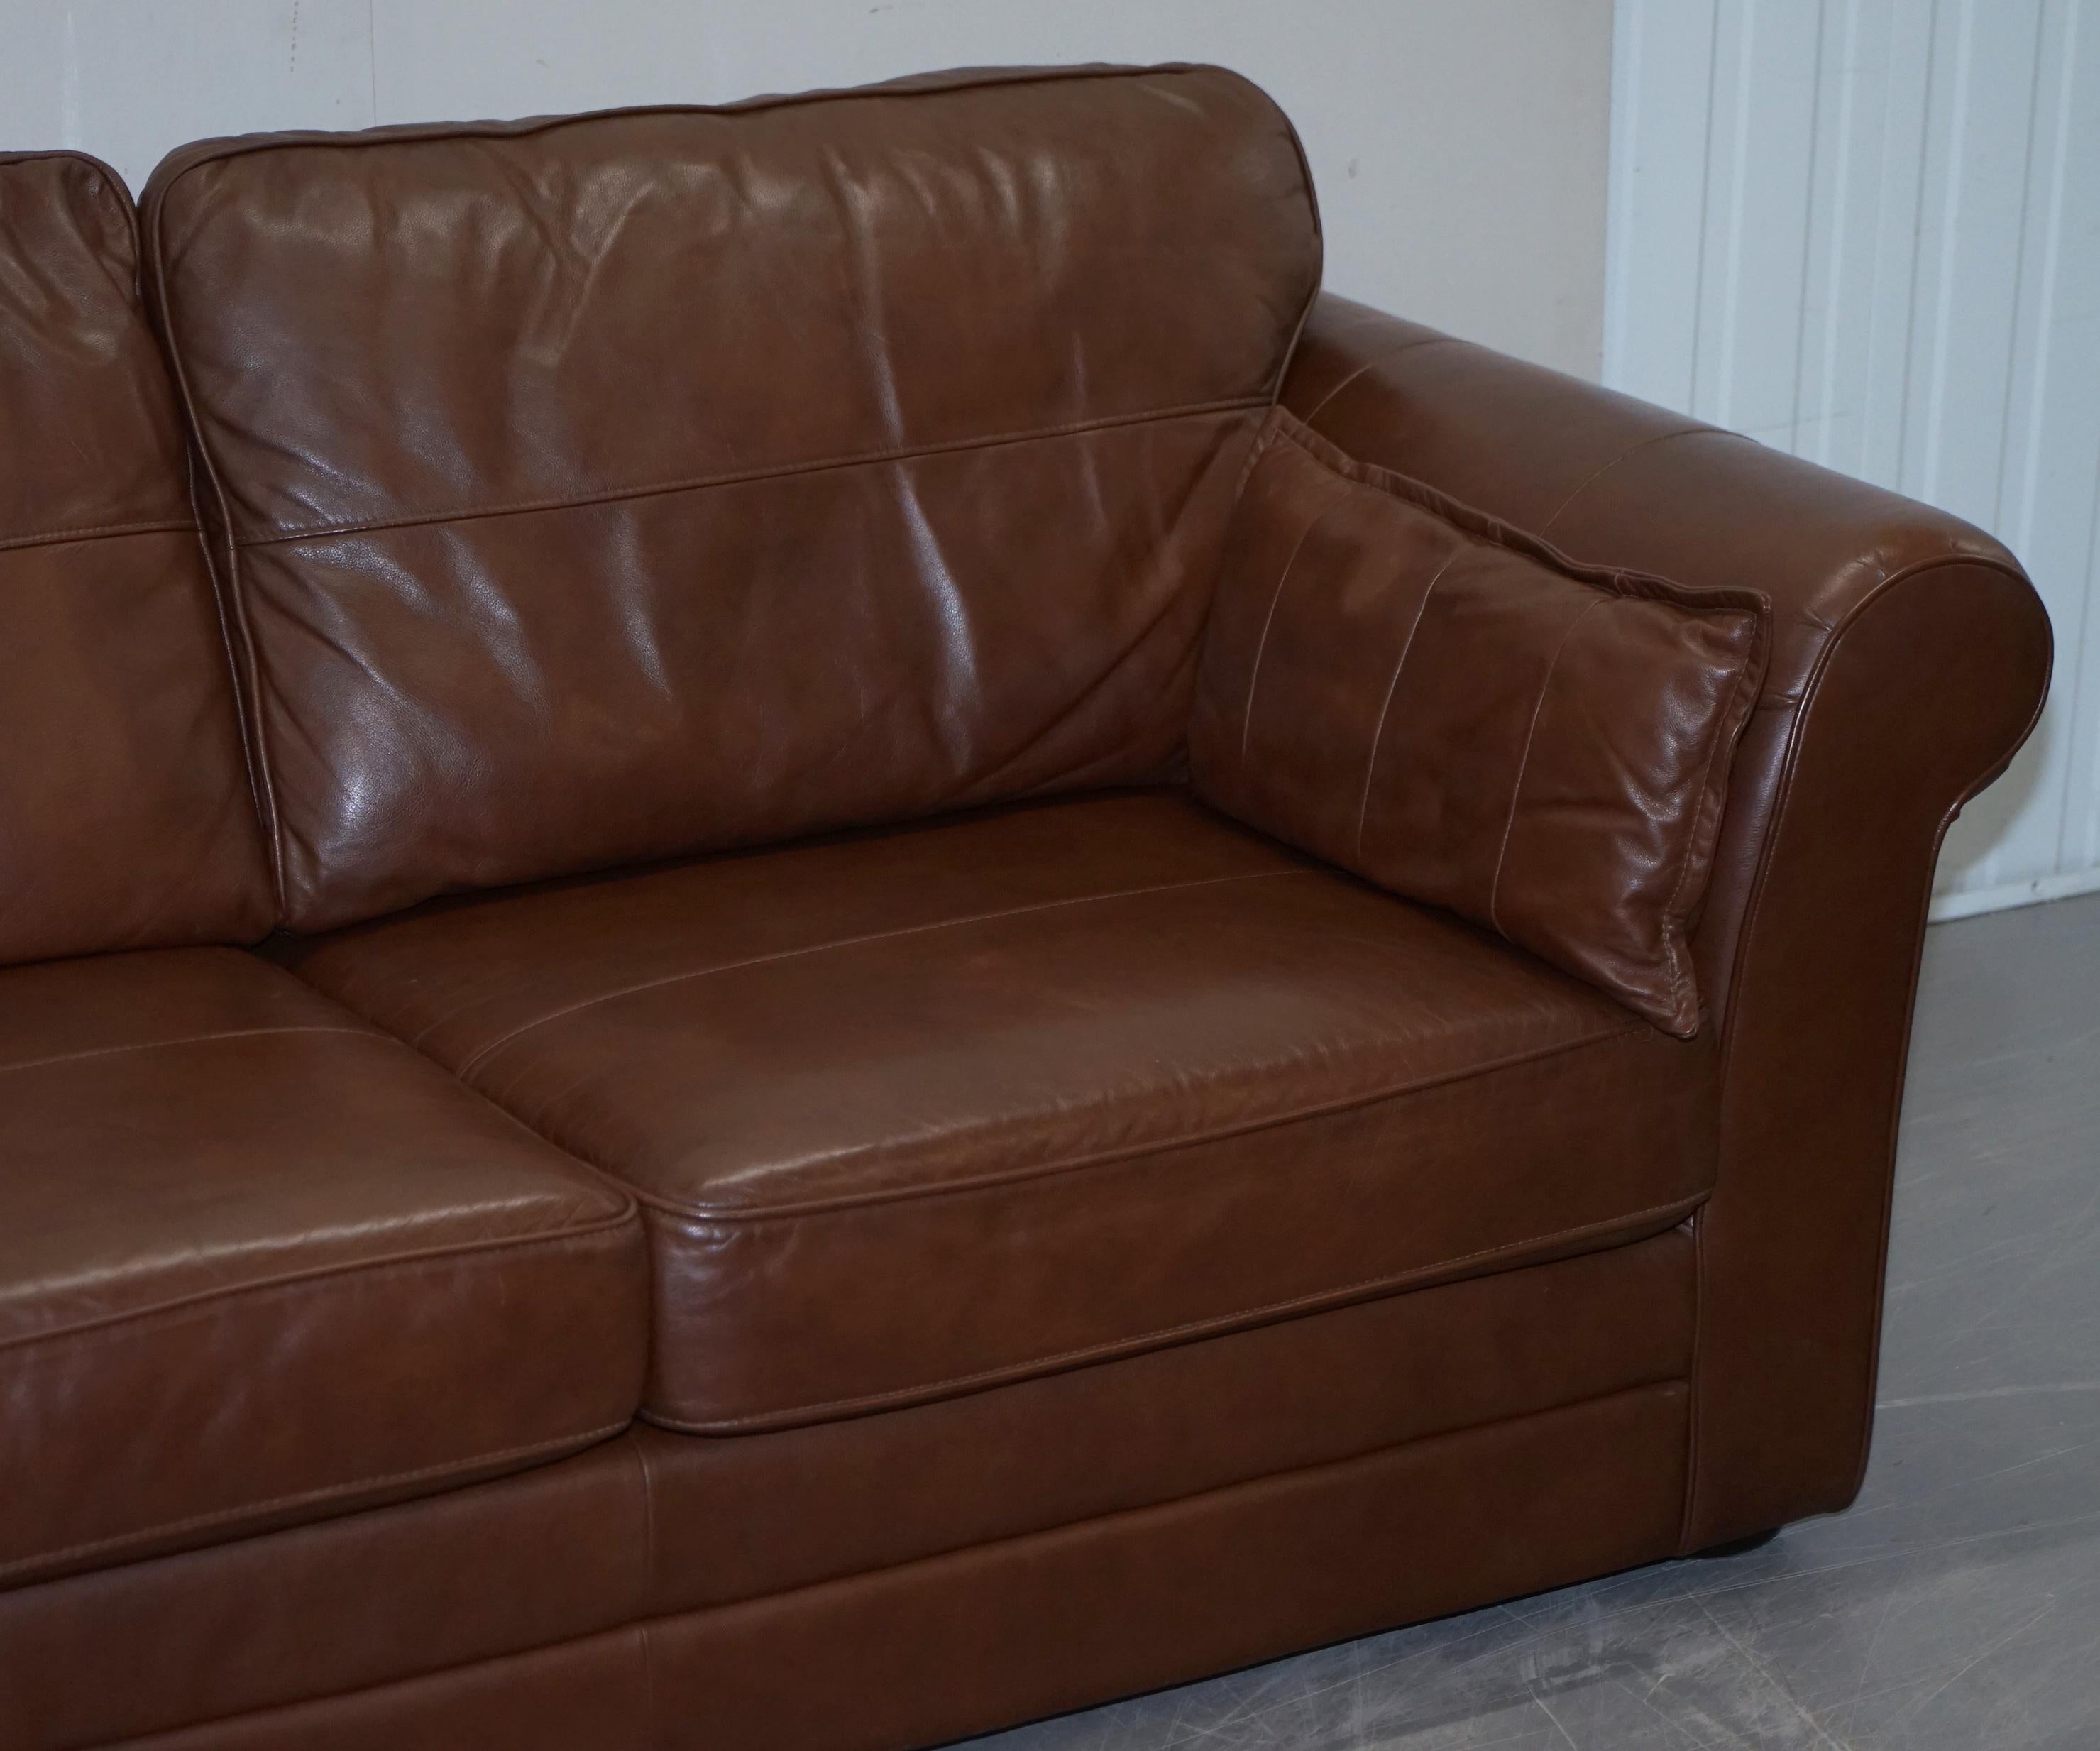 English Contemporary Brown Leather Large Comfortable Three Seat Sofa Part of Large Suite